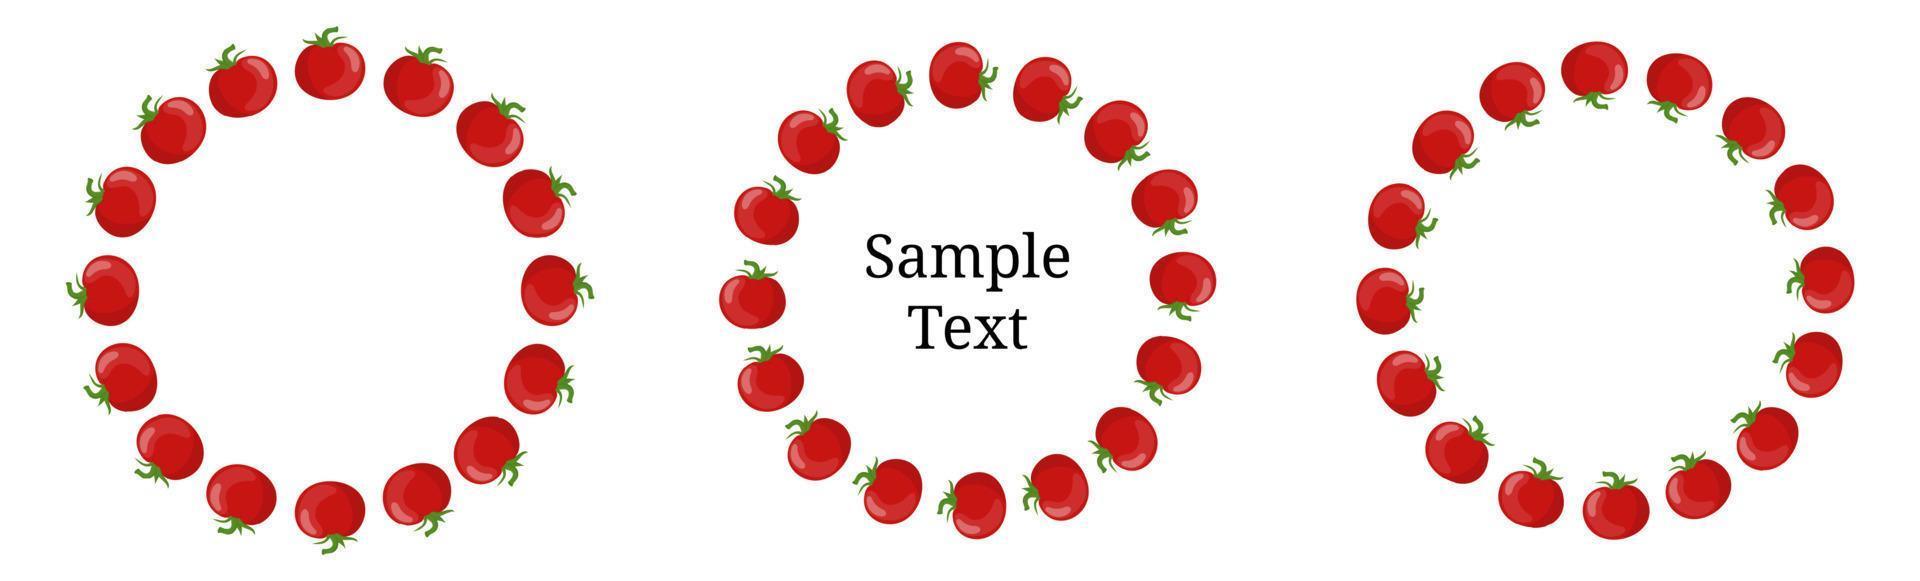 Wreath Set from Tomatoes with Space for Text. Fresh Red Tomato Vegetable isolated on white background. For Market, Recipe Design. Organic Food. Cartoon Style. Vector illustration for Your Design, Web.